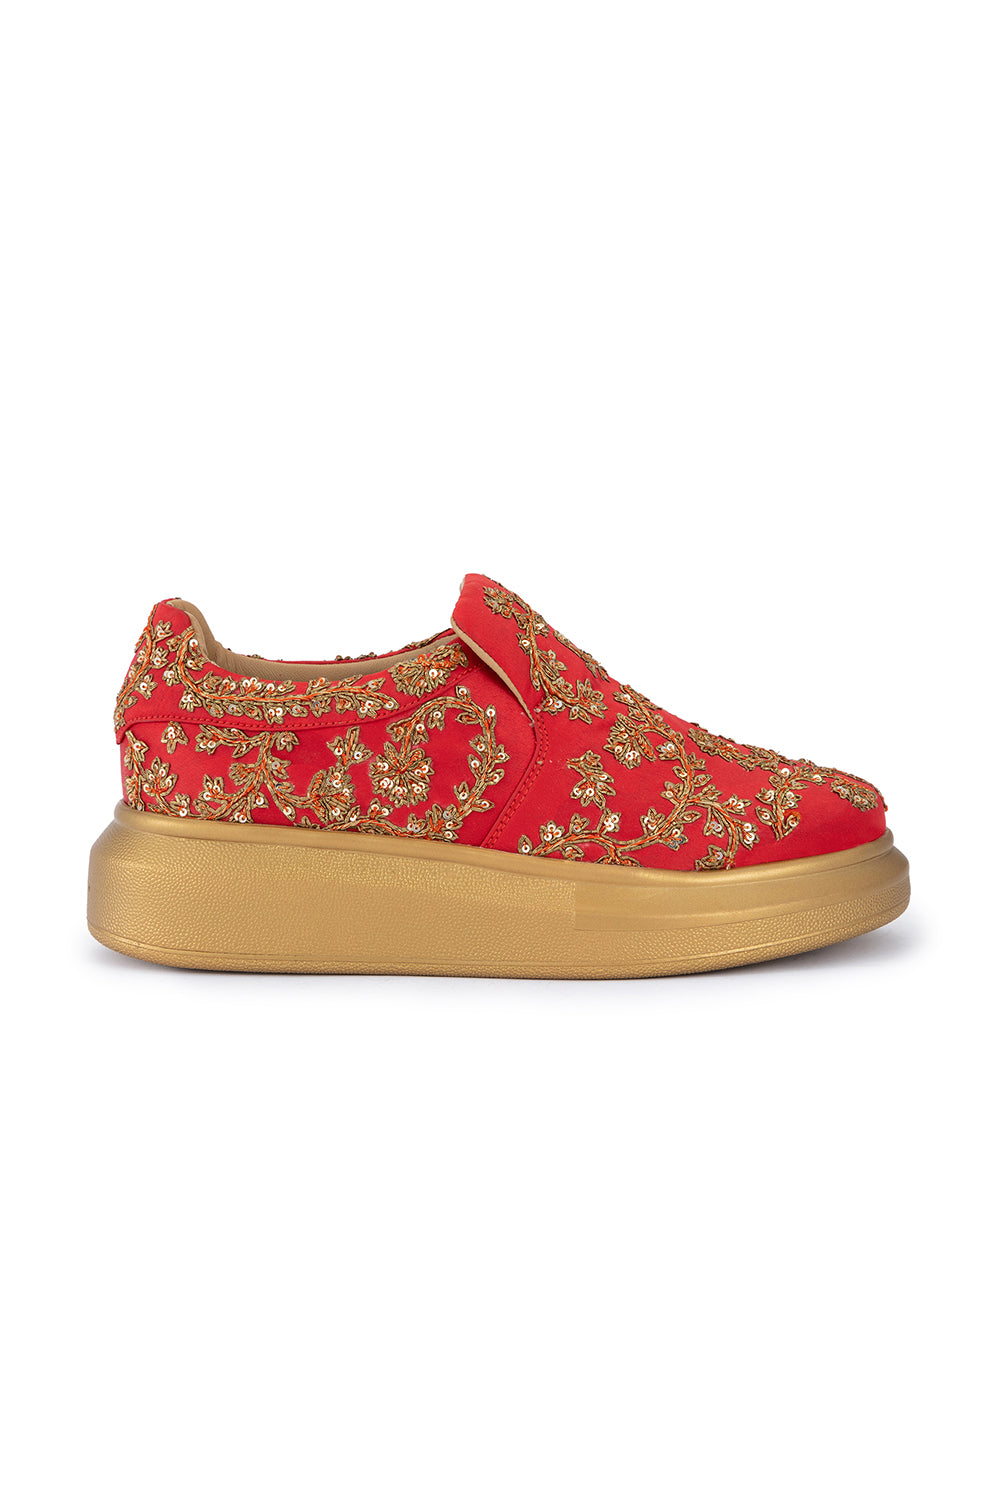 Tomato Red Heirloom Classic Wedge Sneakers